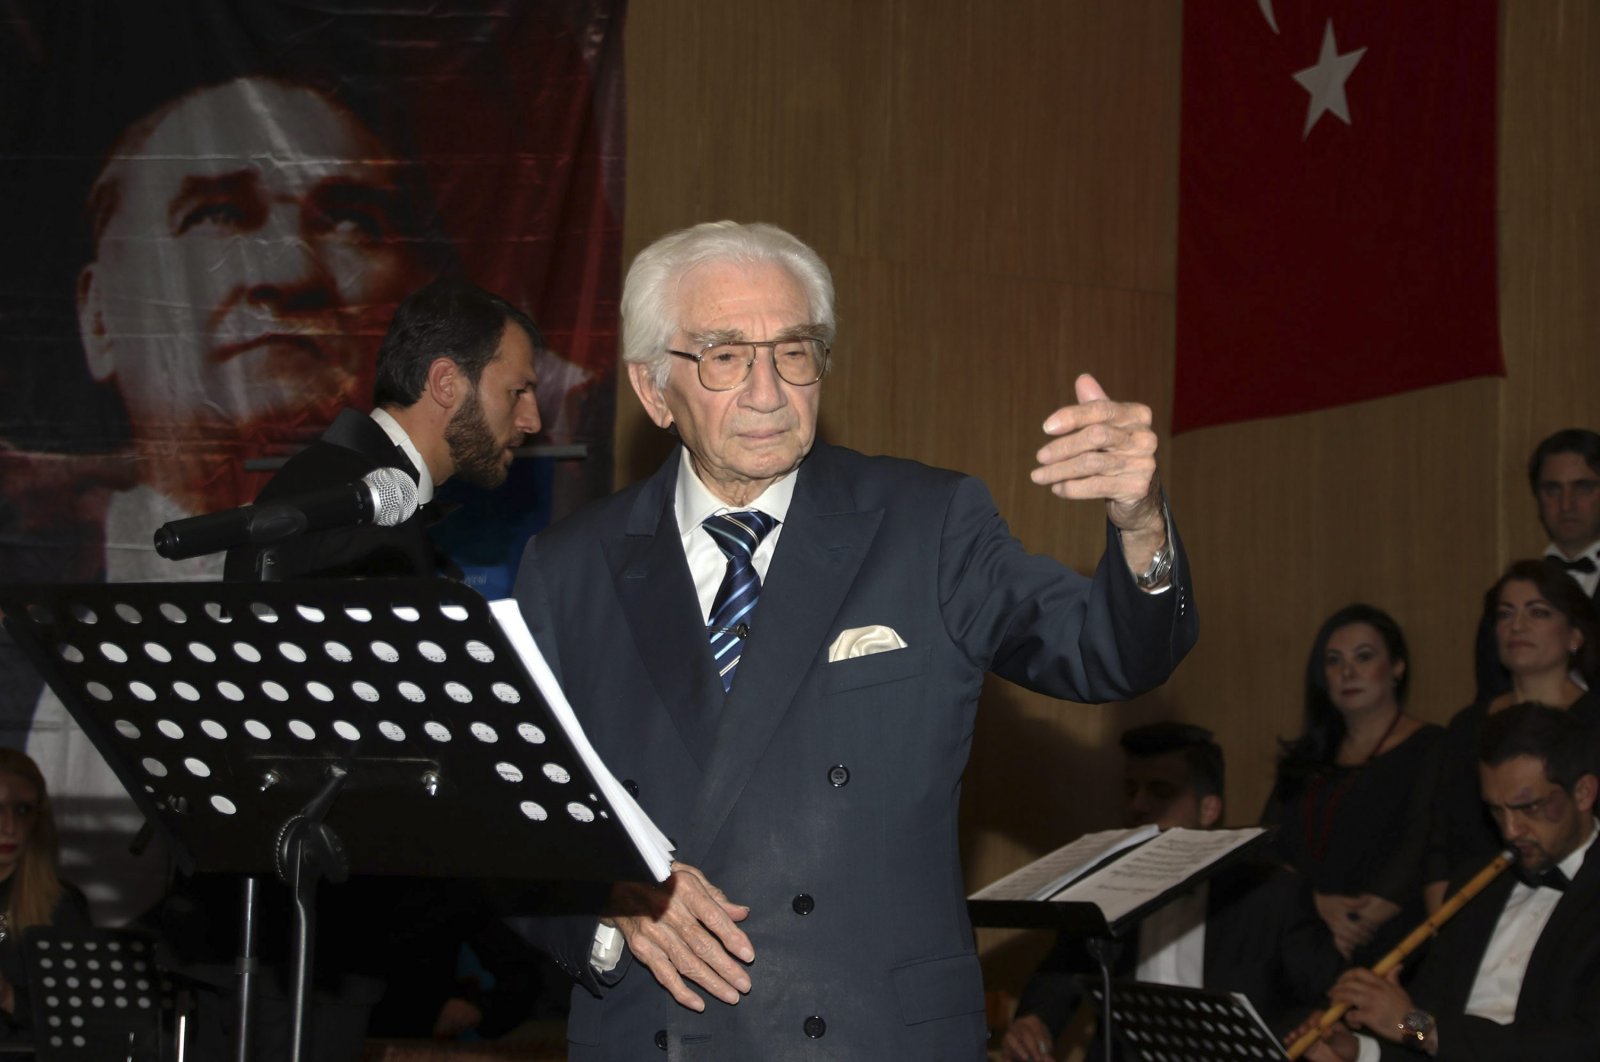 Turkish classical music composer and performer Alaeddin Yavaşca is seen on stage during a concert in Antalya, southern Turkey, Dec. 3, 2016. (IHA Photo)